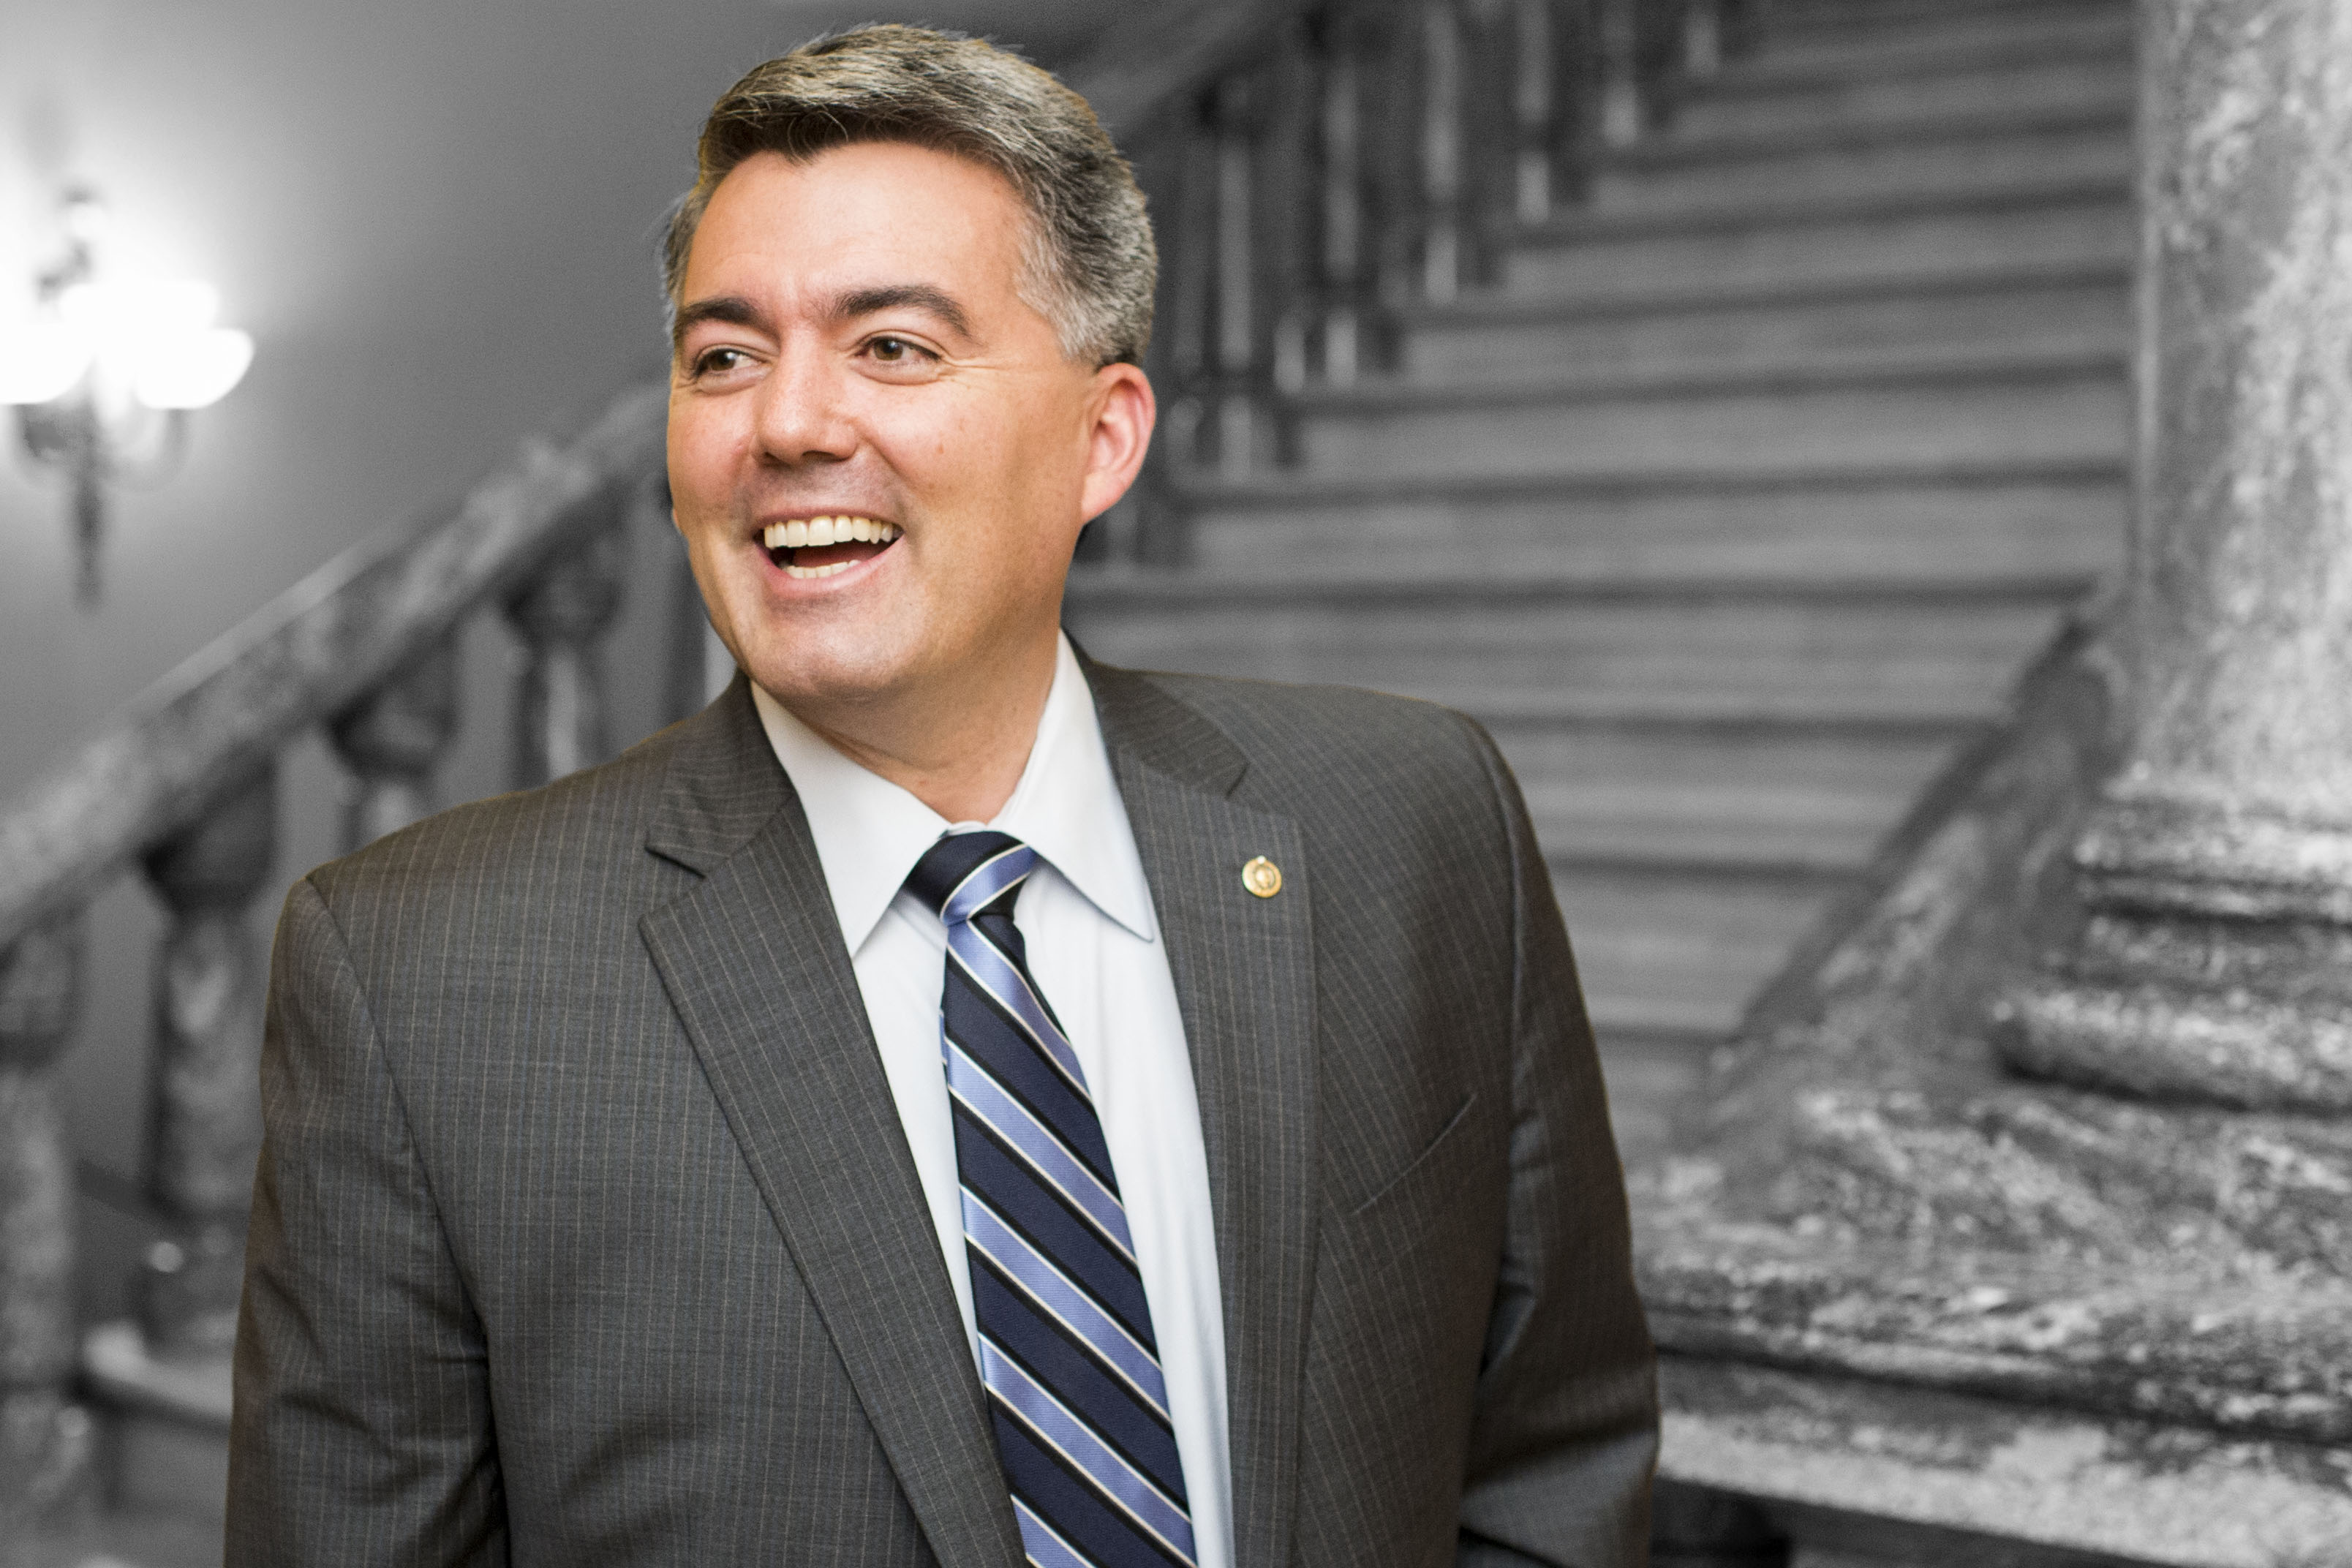 Cory Gardner: 
                        The Colorado Senator showed how Republicans can win in a purple state in 2014 by countering attempts to paint him as unsupportive of women's concerns. When the dust from the GOP primary settles, the eventual presidential candidate may follow his lead. (Sen. Cory Gardner (CQ-Roll Call))